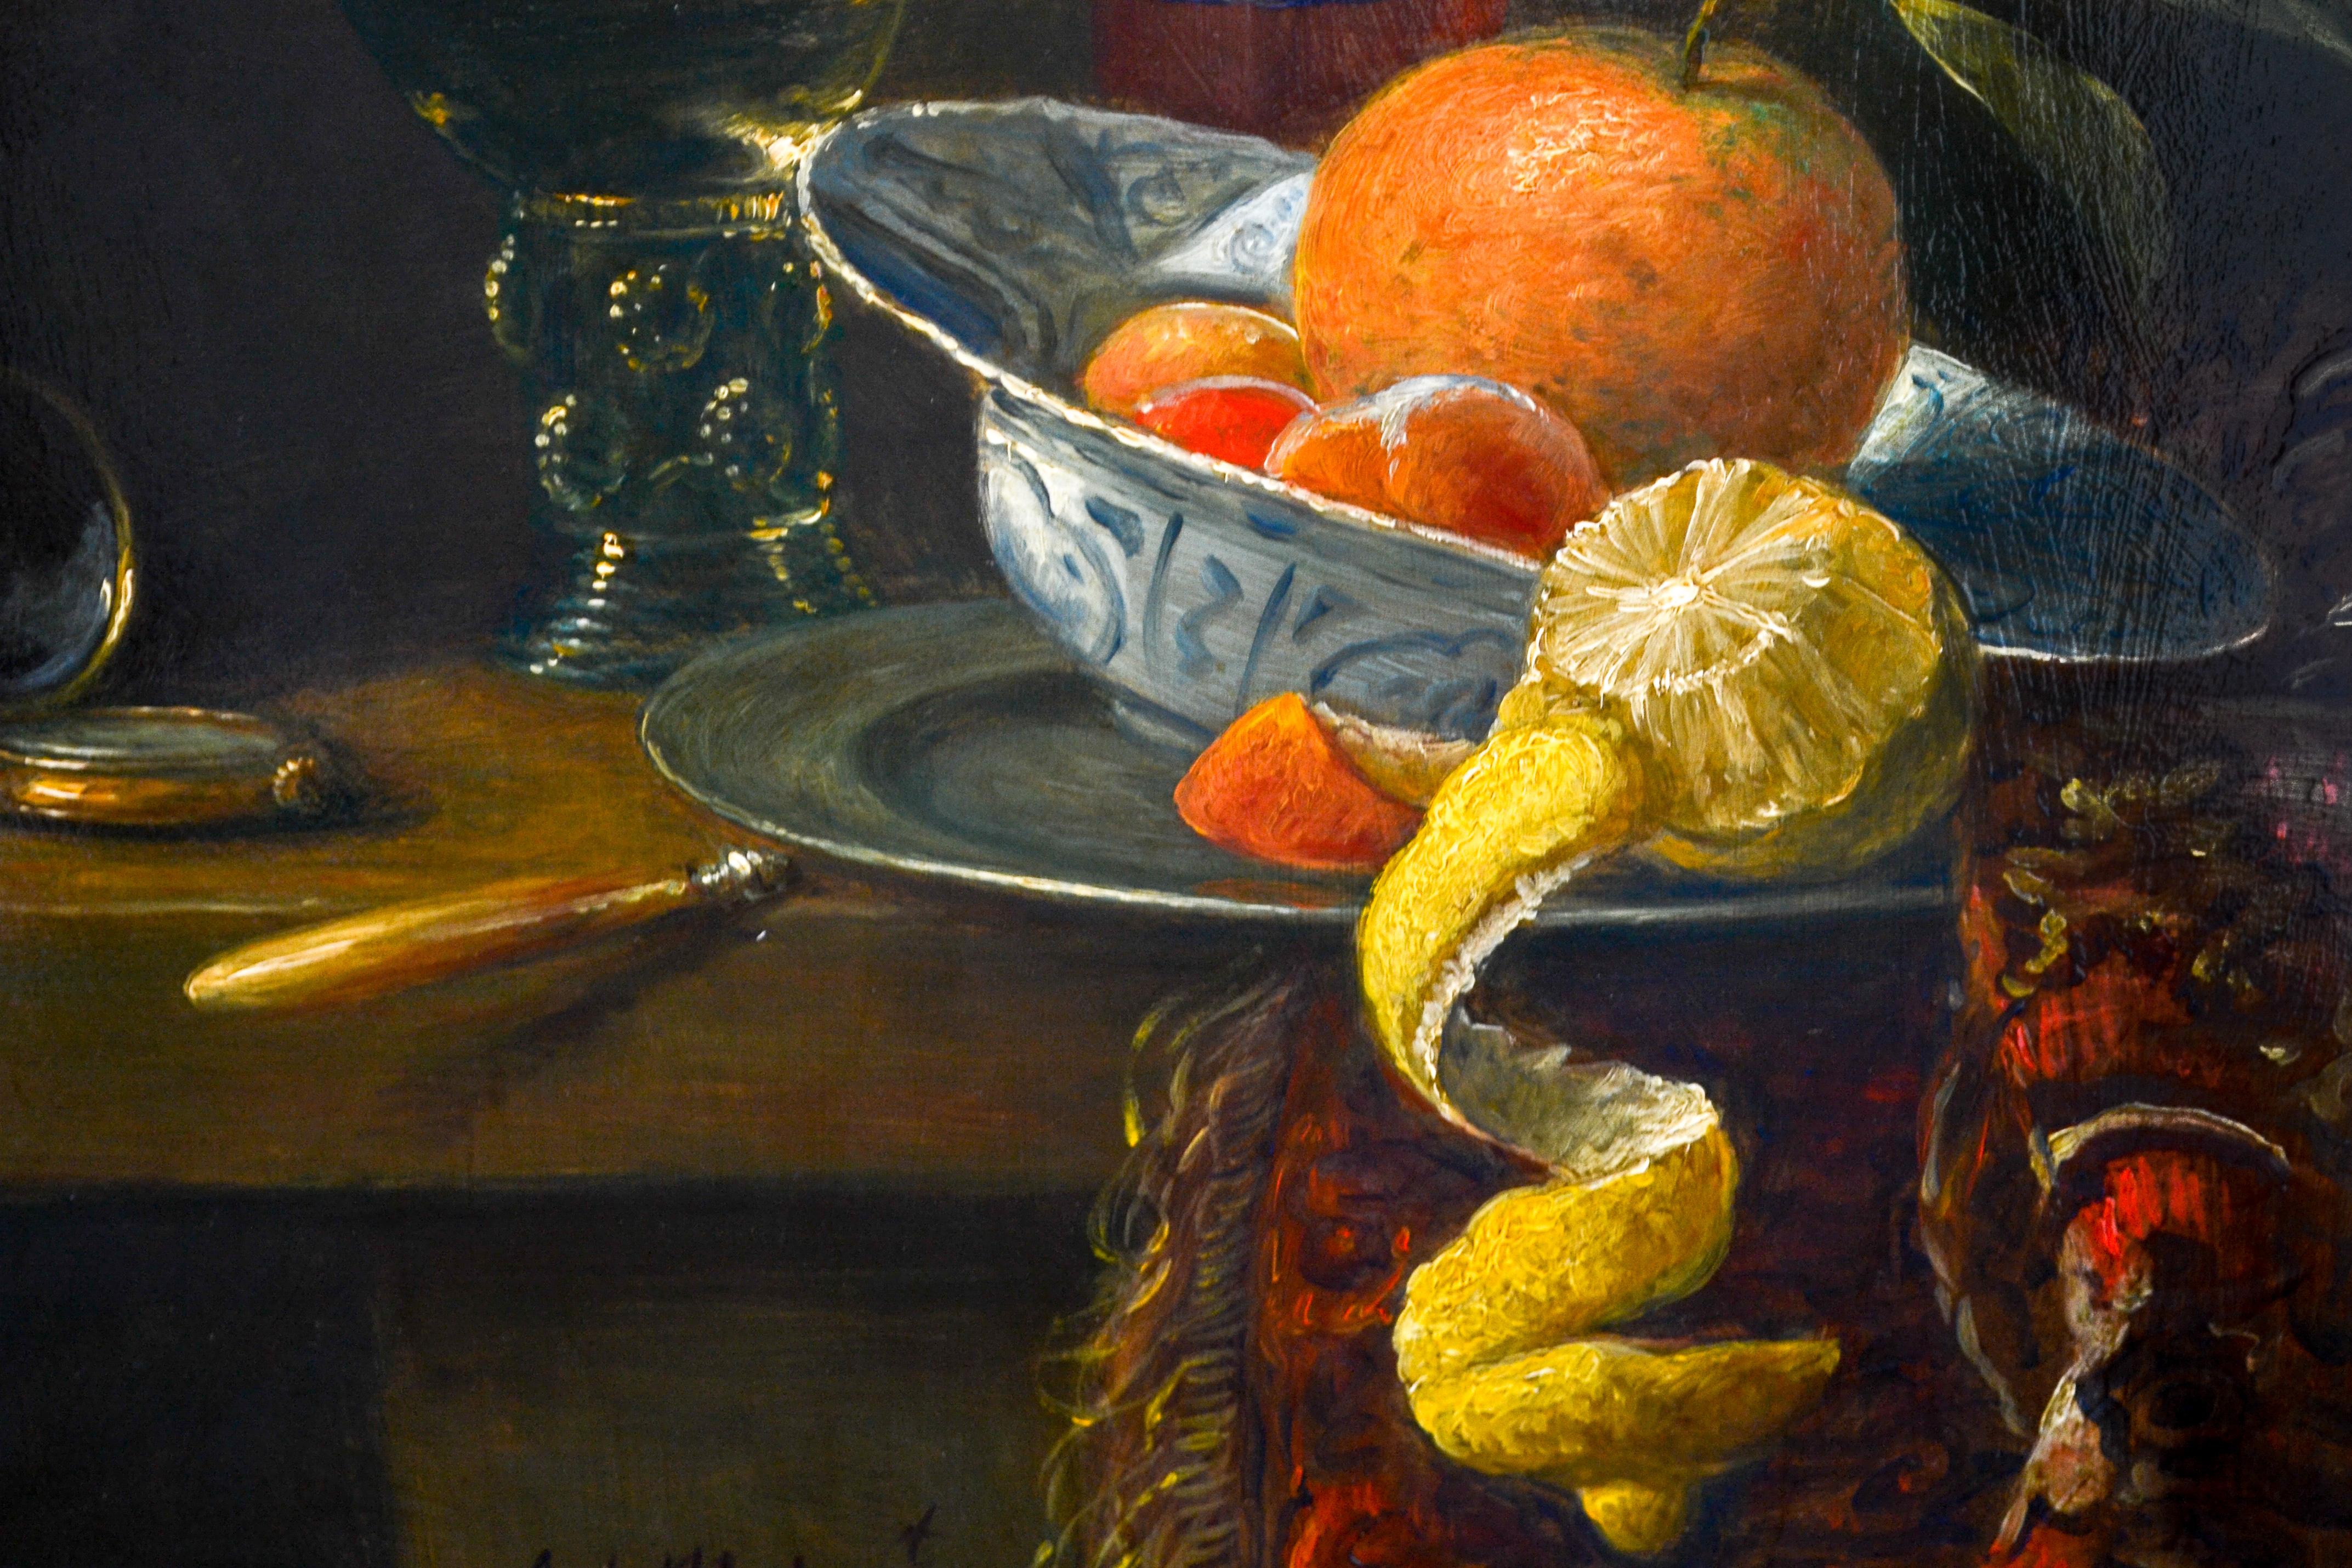 Peeled Lemon On The Table - Classic Style Oil Painting by Cornelis Le Mair  1